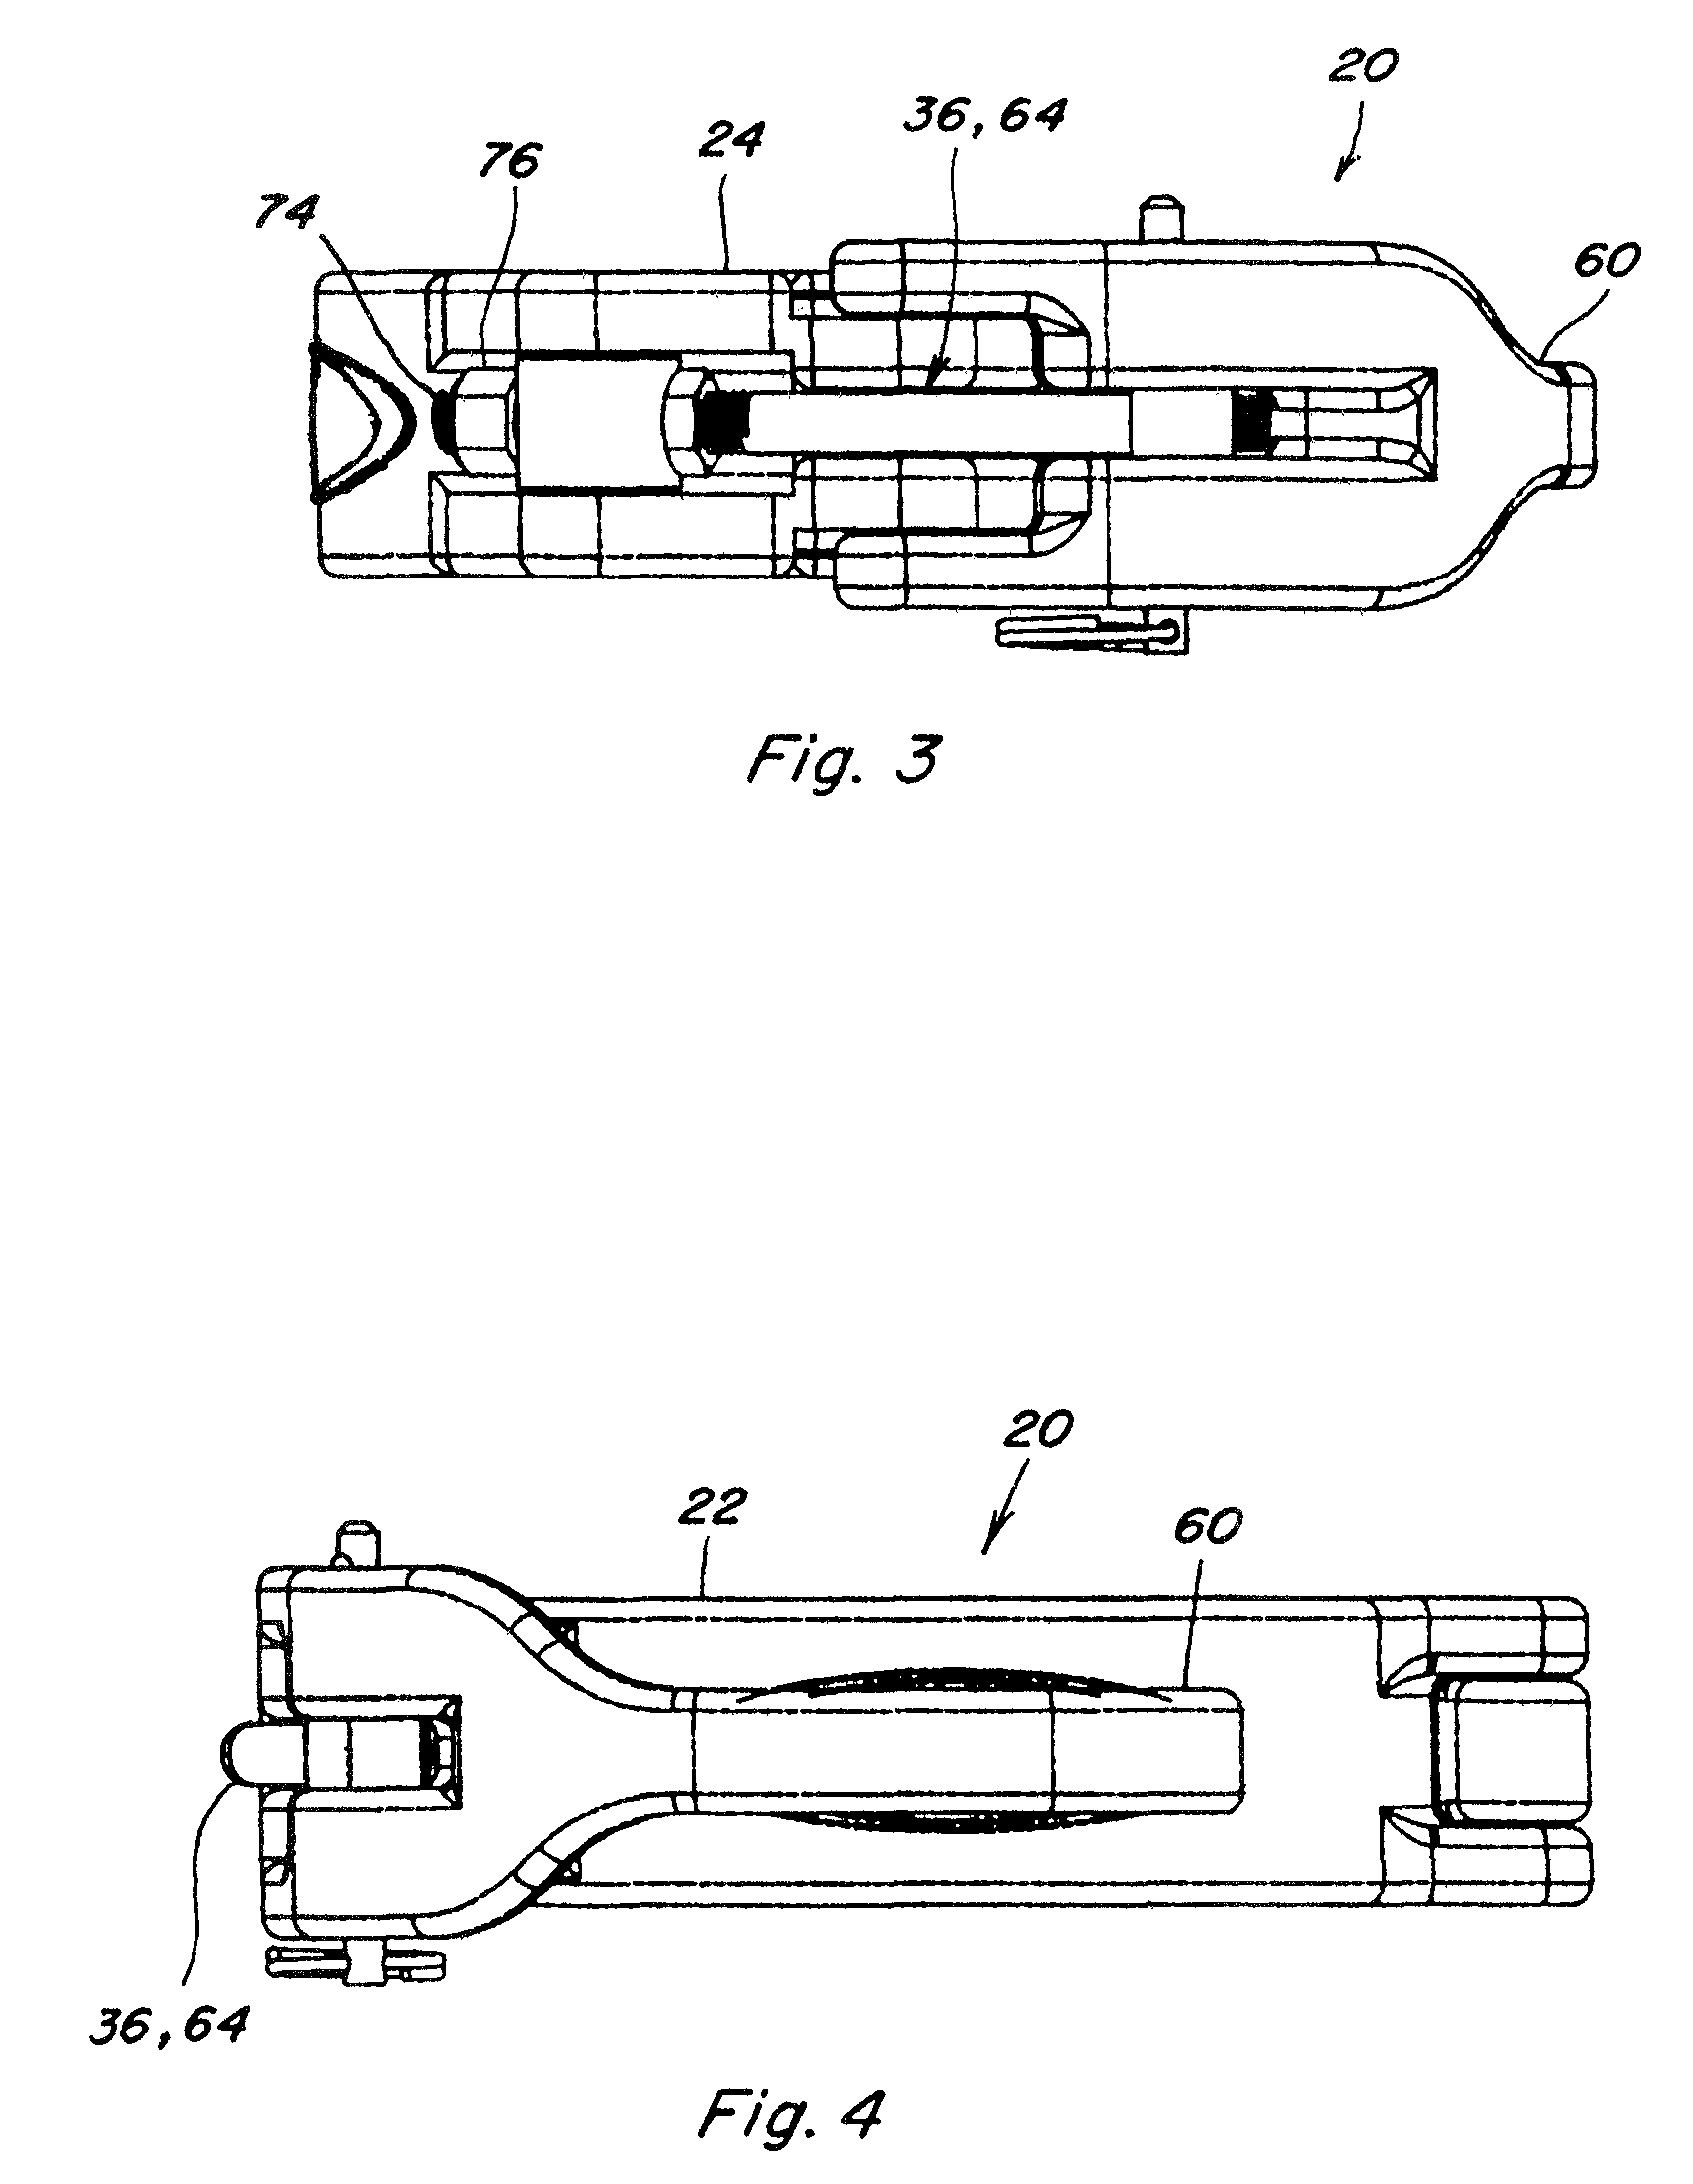 Pipe coupler and gasket with positive retention and sealing capability